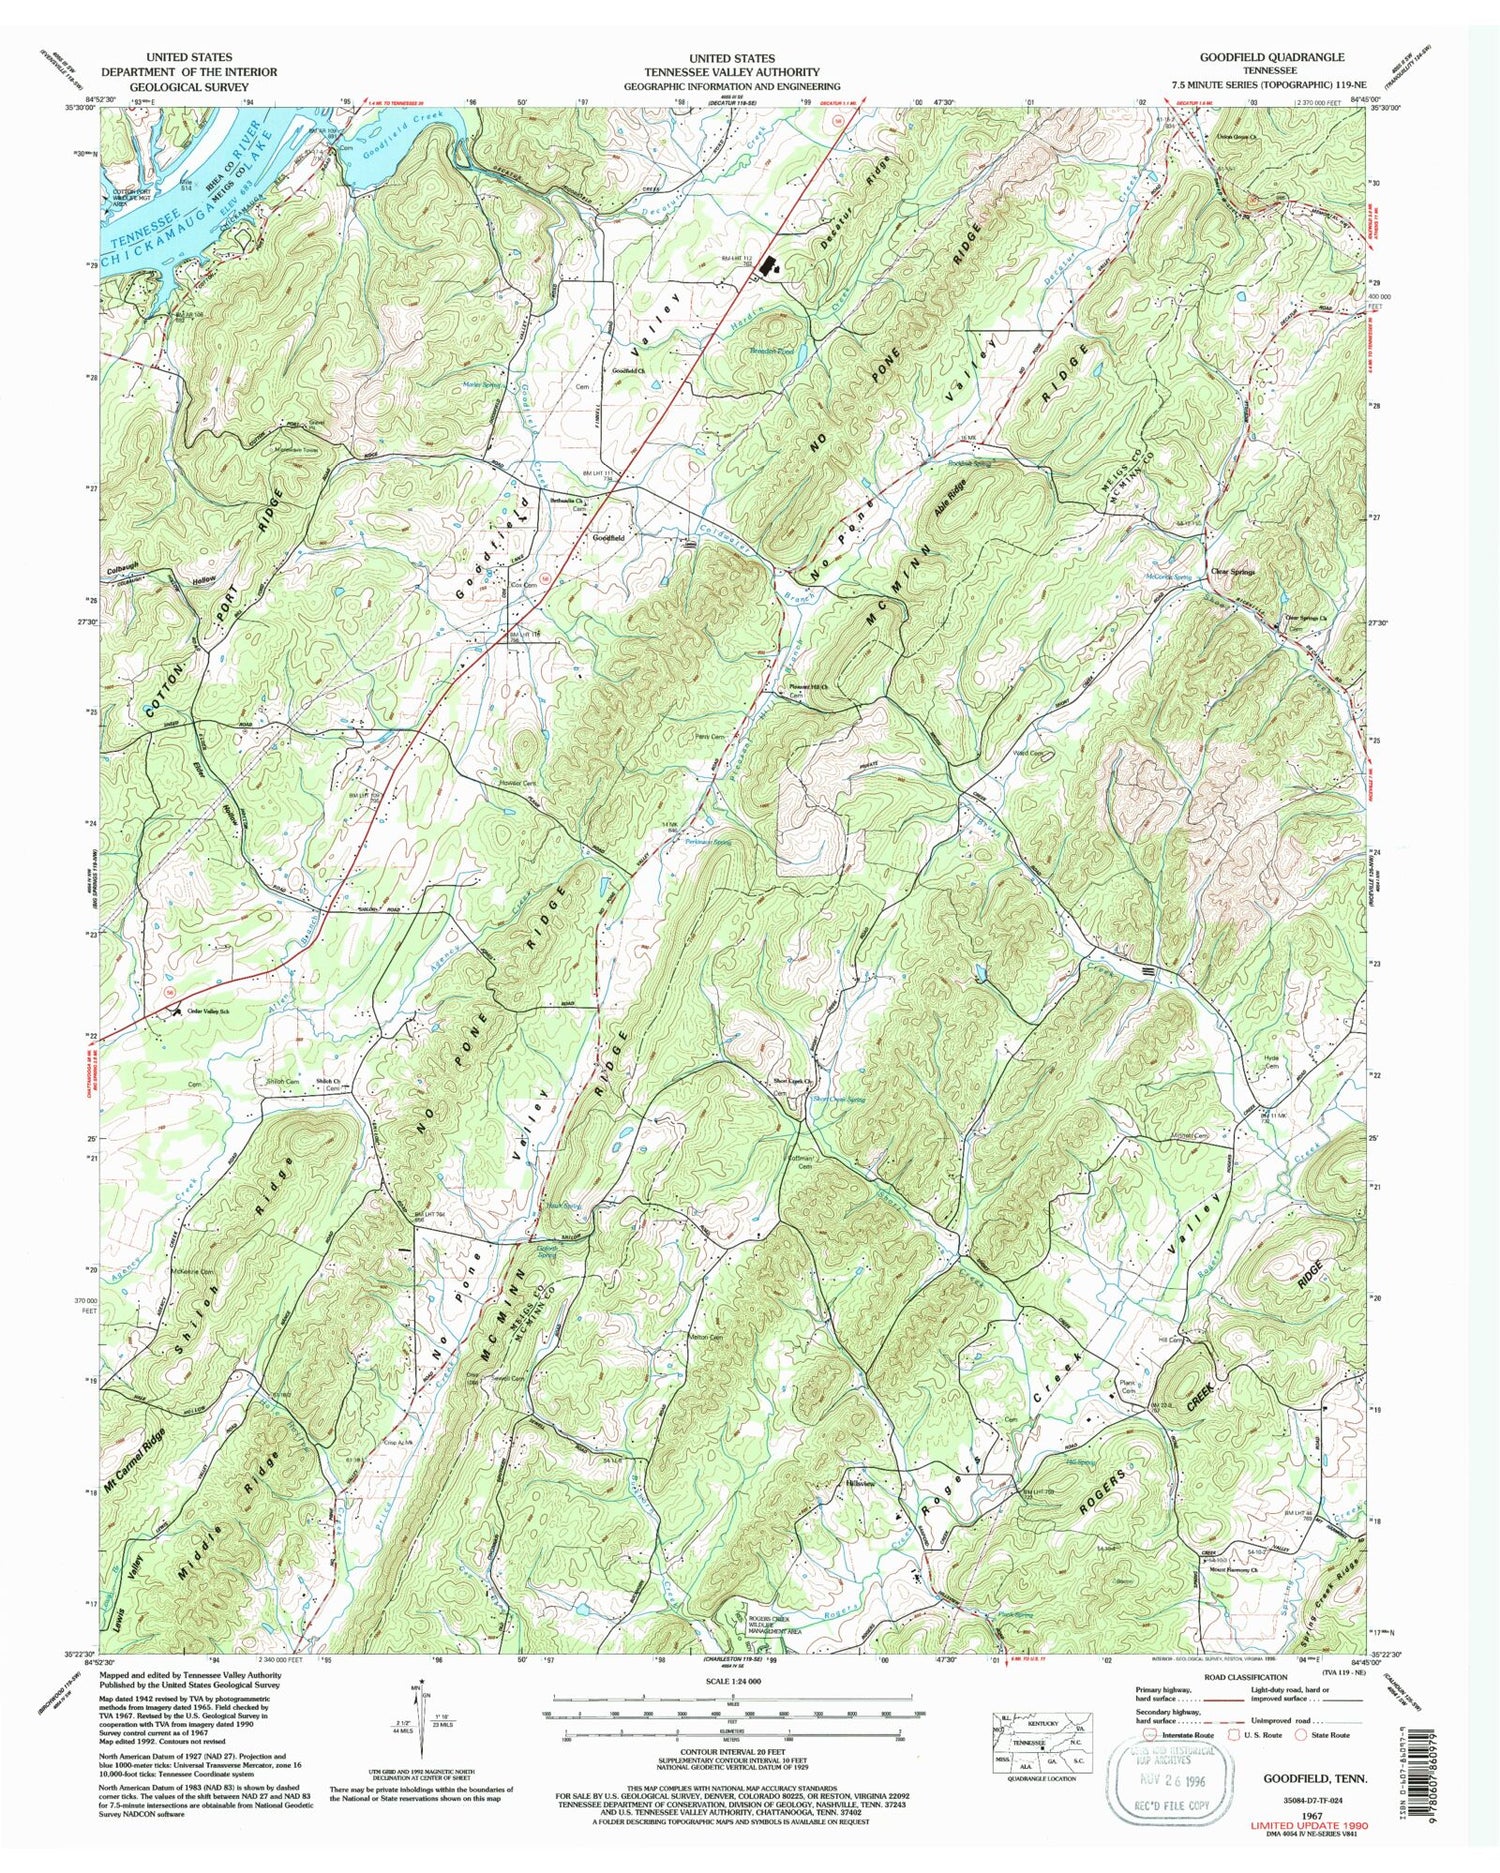 Classic USGS Goodfield Tennessee 7.5'x7.5' Topo Map Image